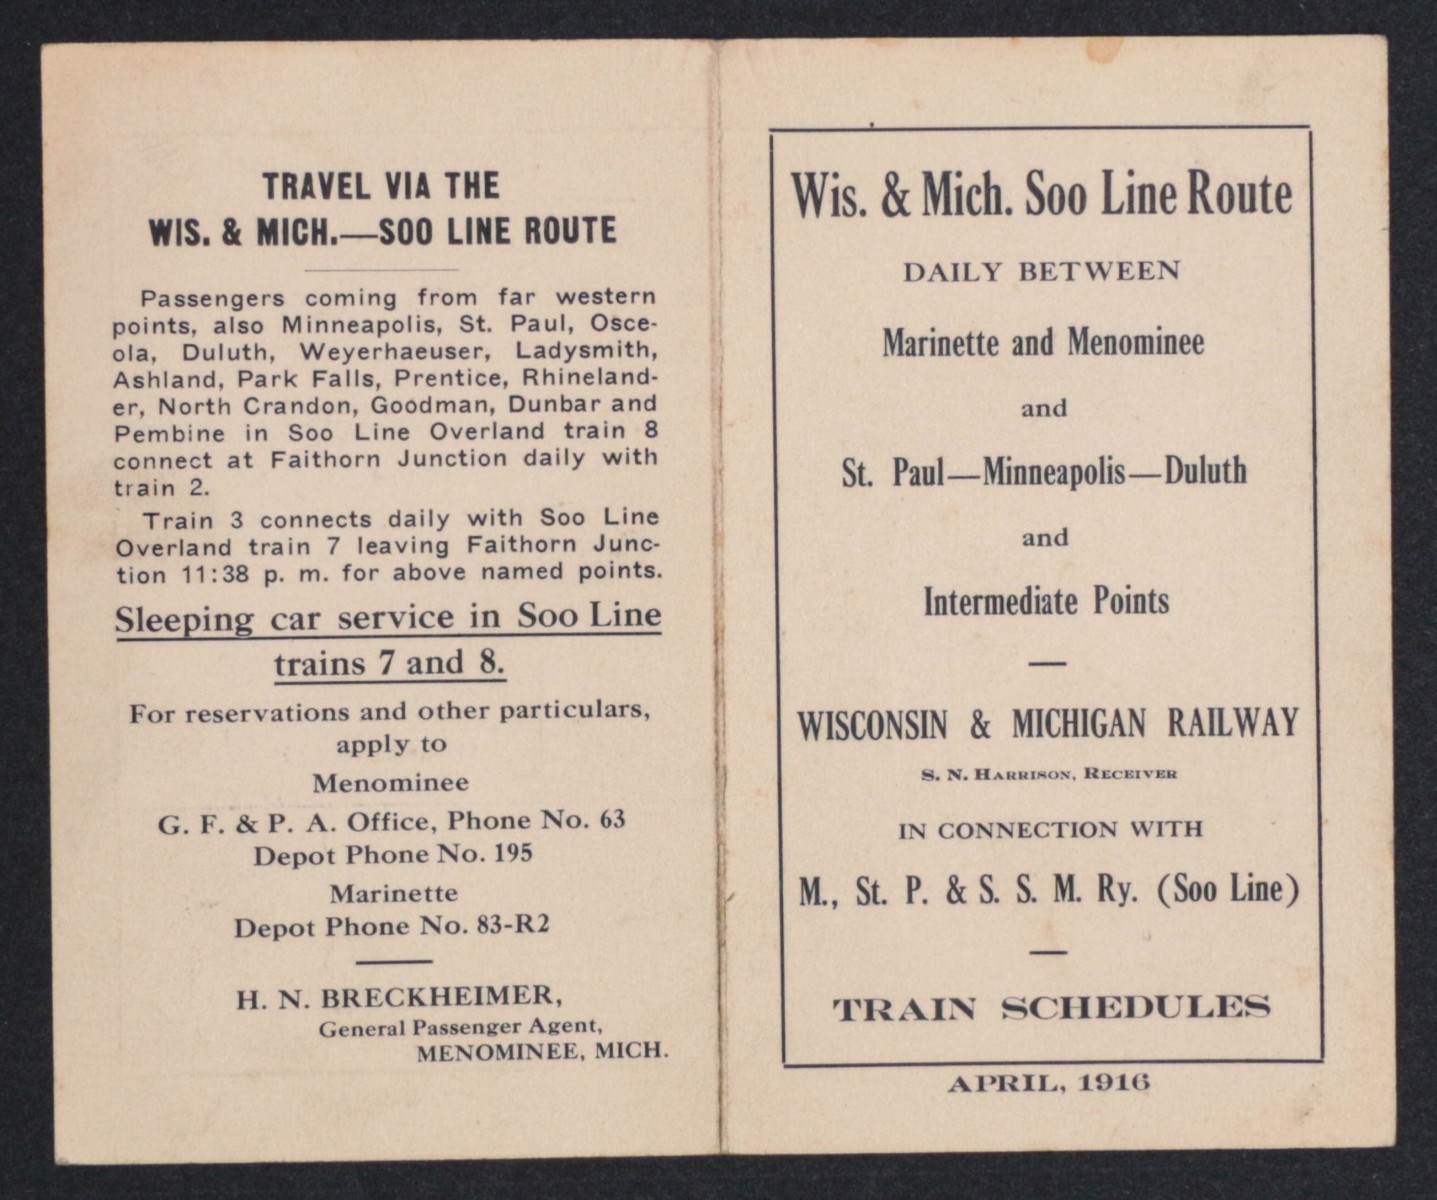 WIS. & MICH. SOO LINE ROUTE TIMETABLE FOR APRIL 1916